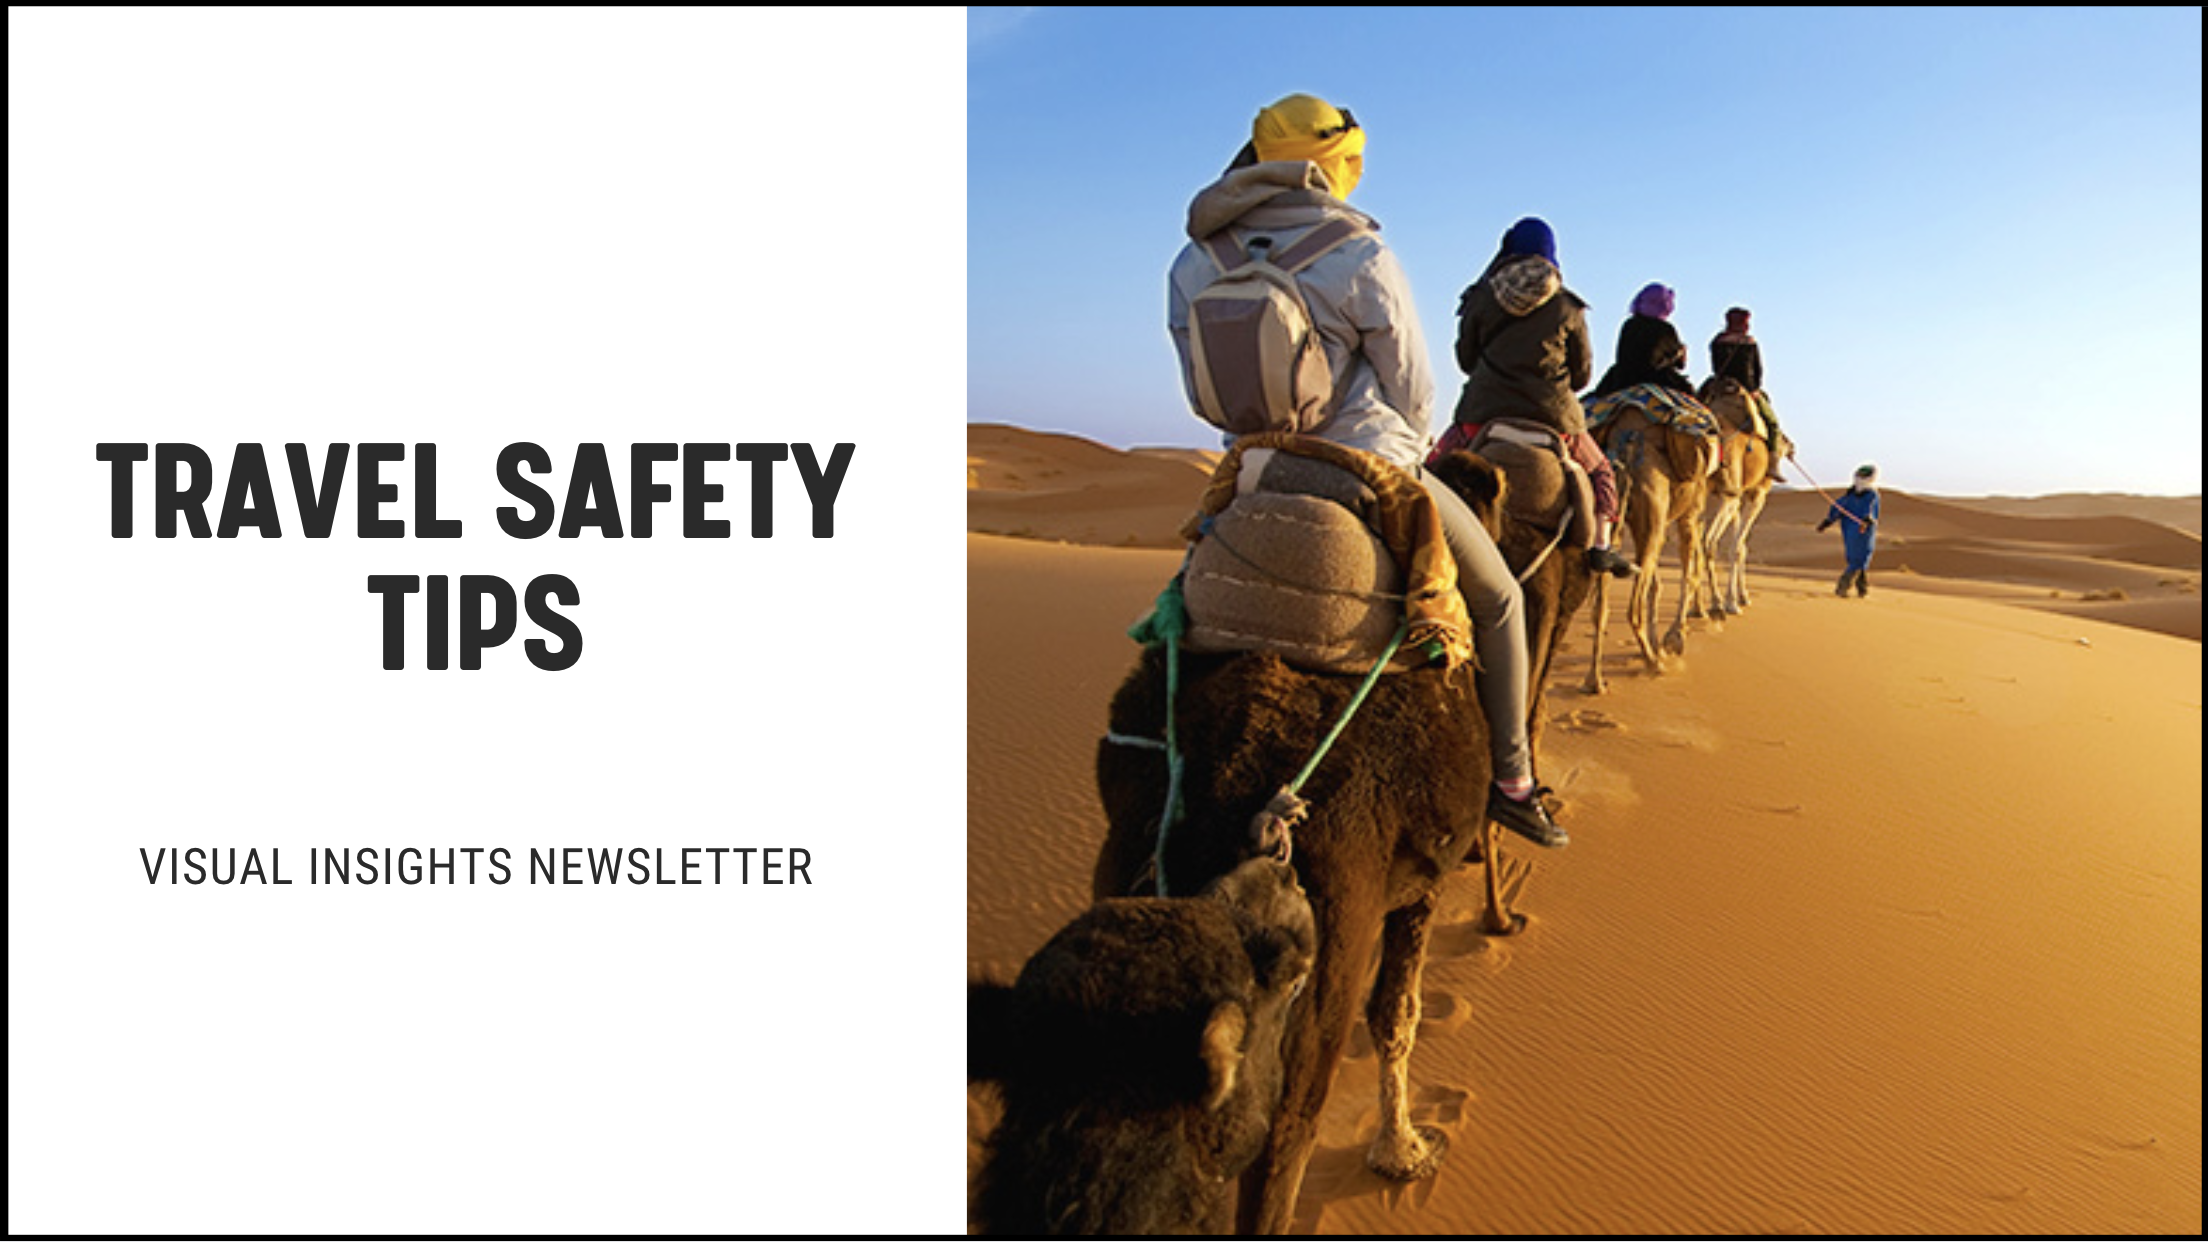 NEW] Travel Safety Tips - Visual Insights Newsletter Marketing